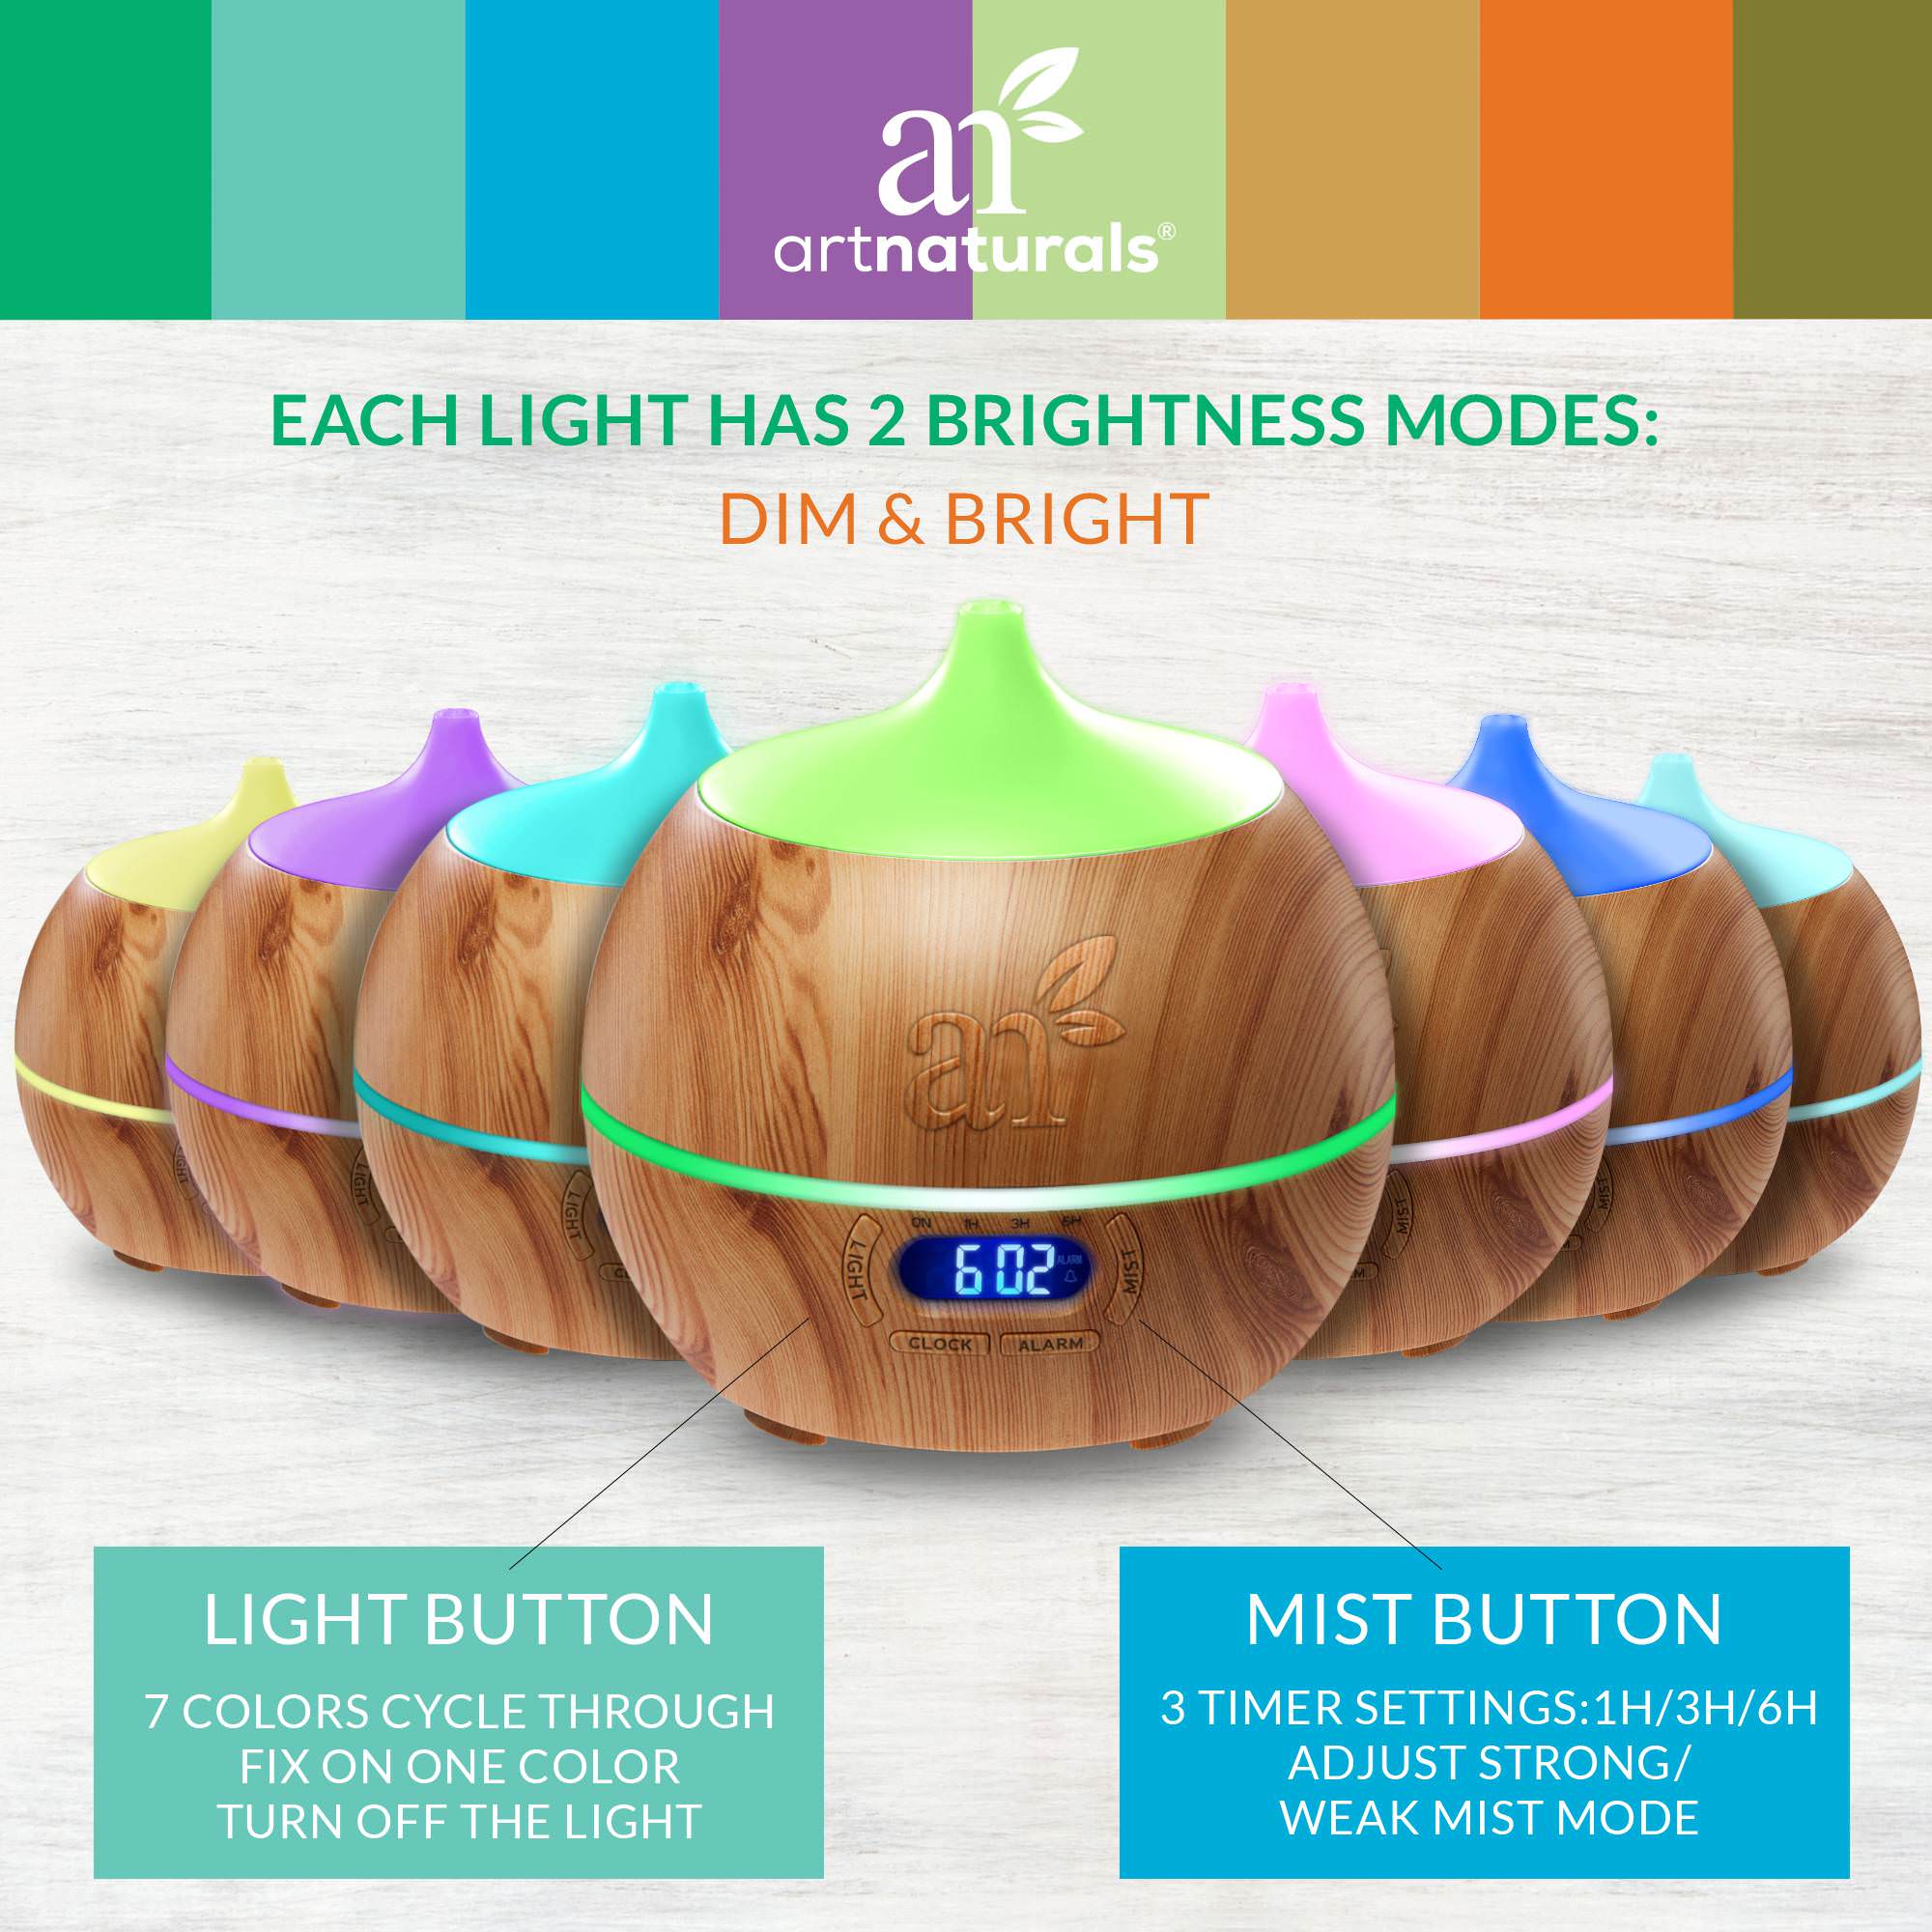 Ultrasonic Bluetooth Essential Oil Diffuser (400mL) 7 Color LED, Clock Purifier - image 3 of 6